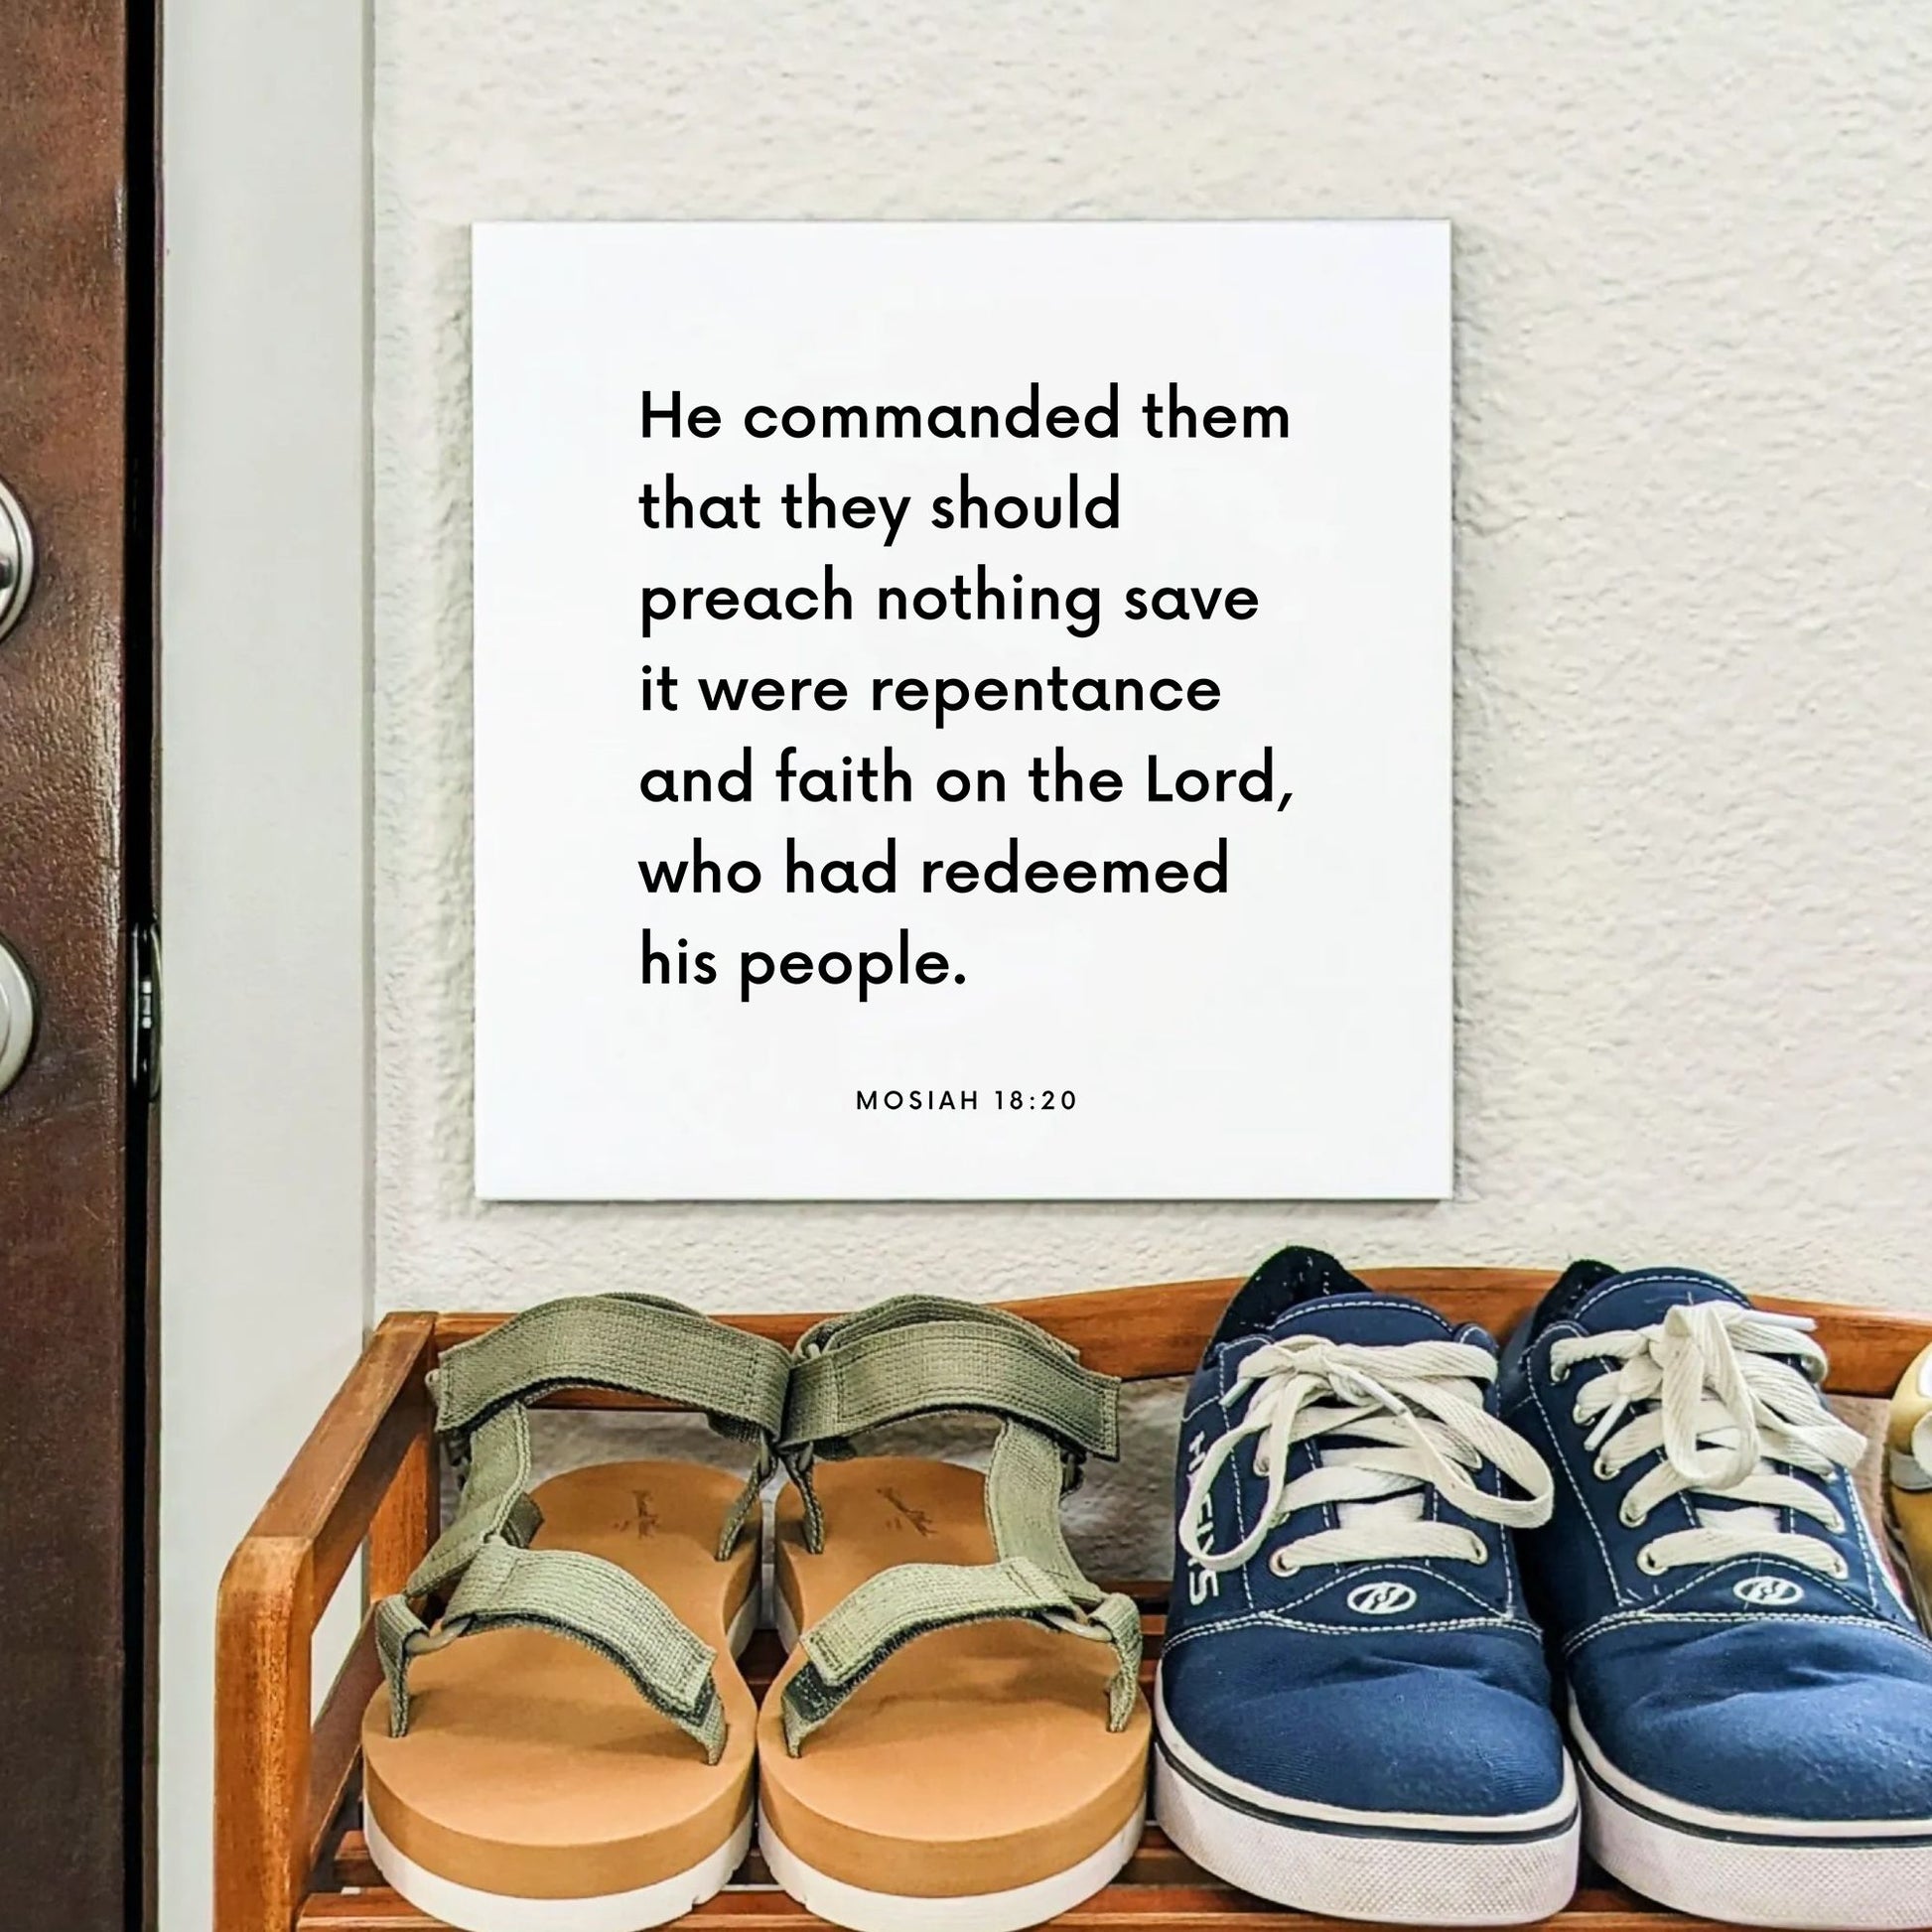 Shoes mouting of the scripture tile for Mosiah 18:20 - "They should preach nothing save it were repentance and faith"